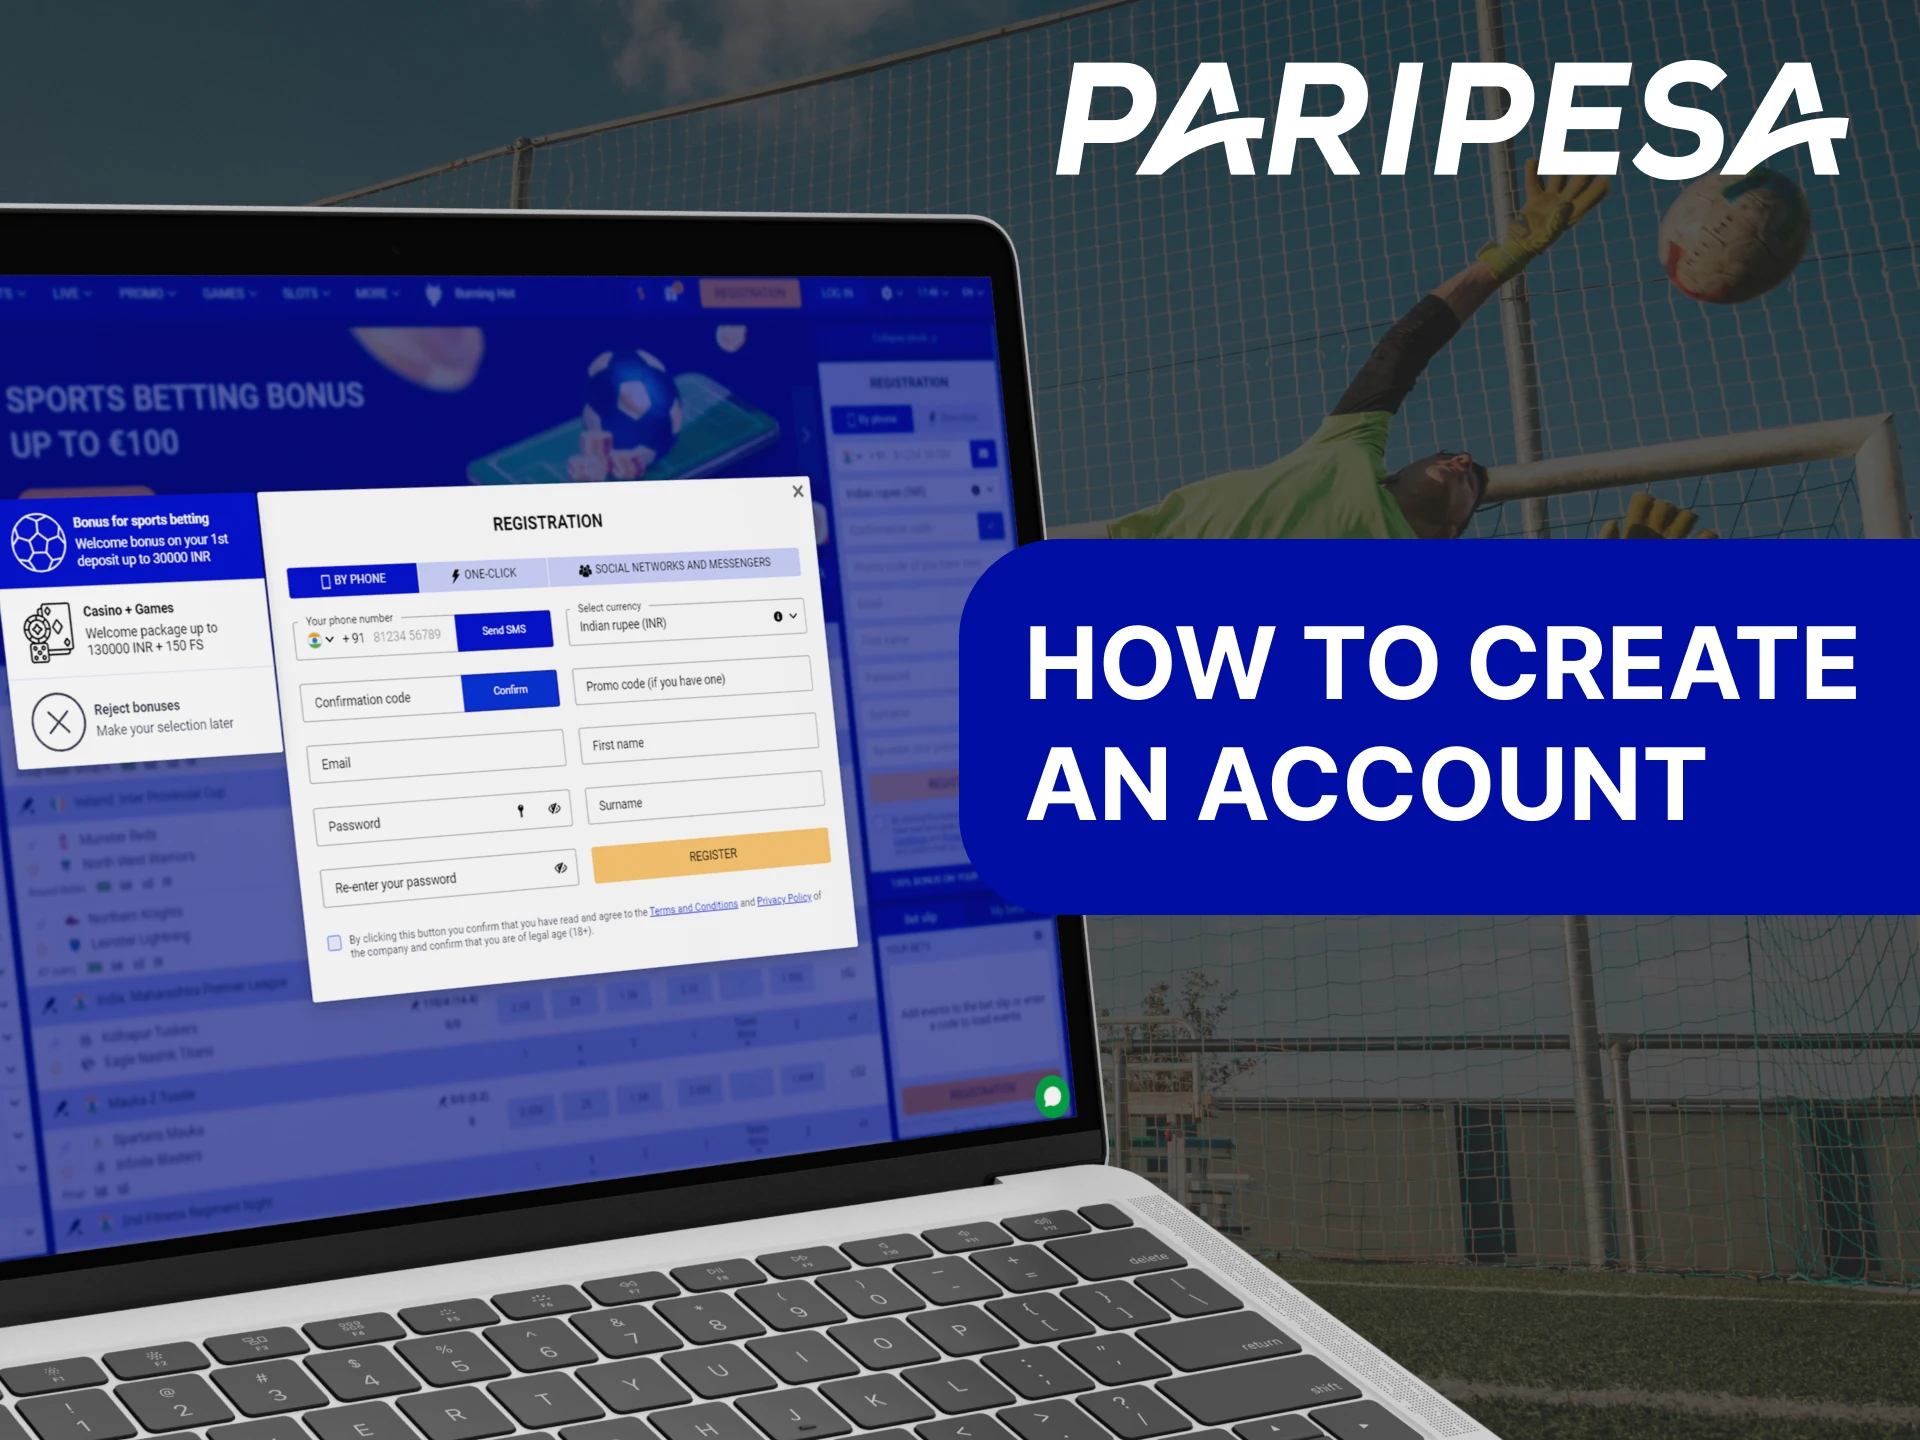 This way you can create an account with Paripesa.